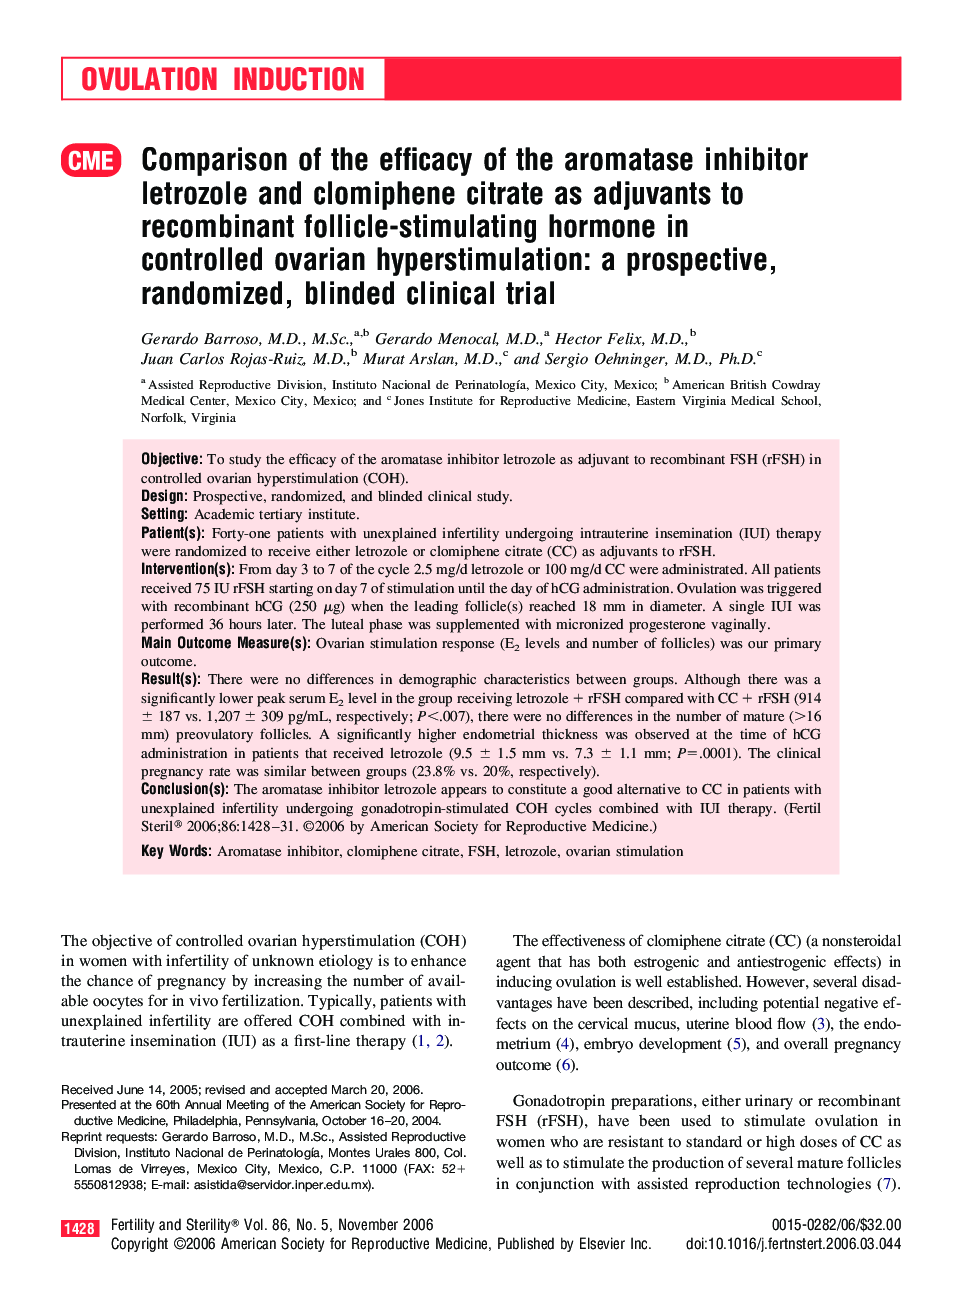  Comparison of the efficacy of the aromatase inhibitor letrozole and clomiphene citrate as adjuvants to recombinant follicle-stimulating hormone in controlled ovarian hyperstimulation: a prospective, randomized, blinded clinical trial